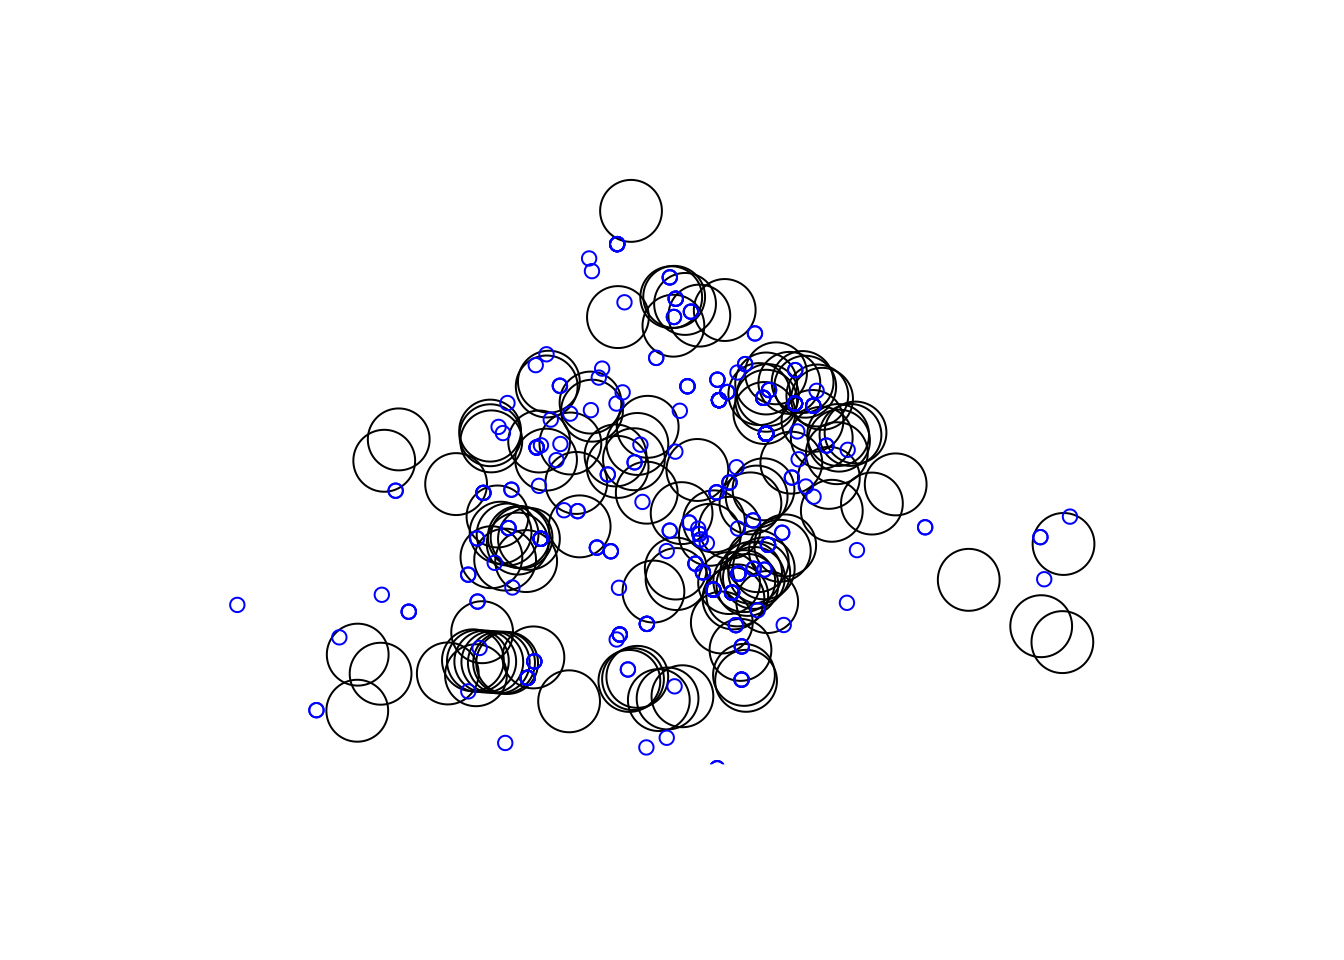 Medium sized black circles, from the previous figure, are now joined by small blue circles. Some concentrations of the two types of circles align.